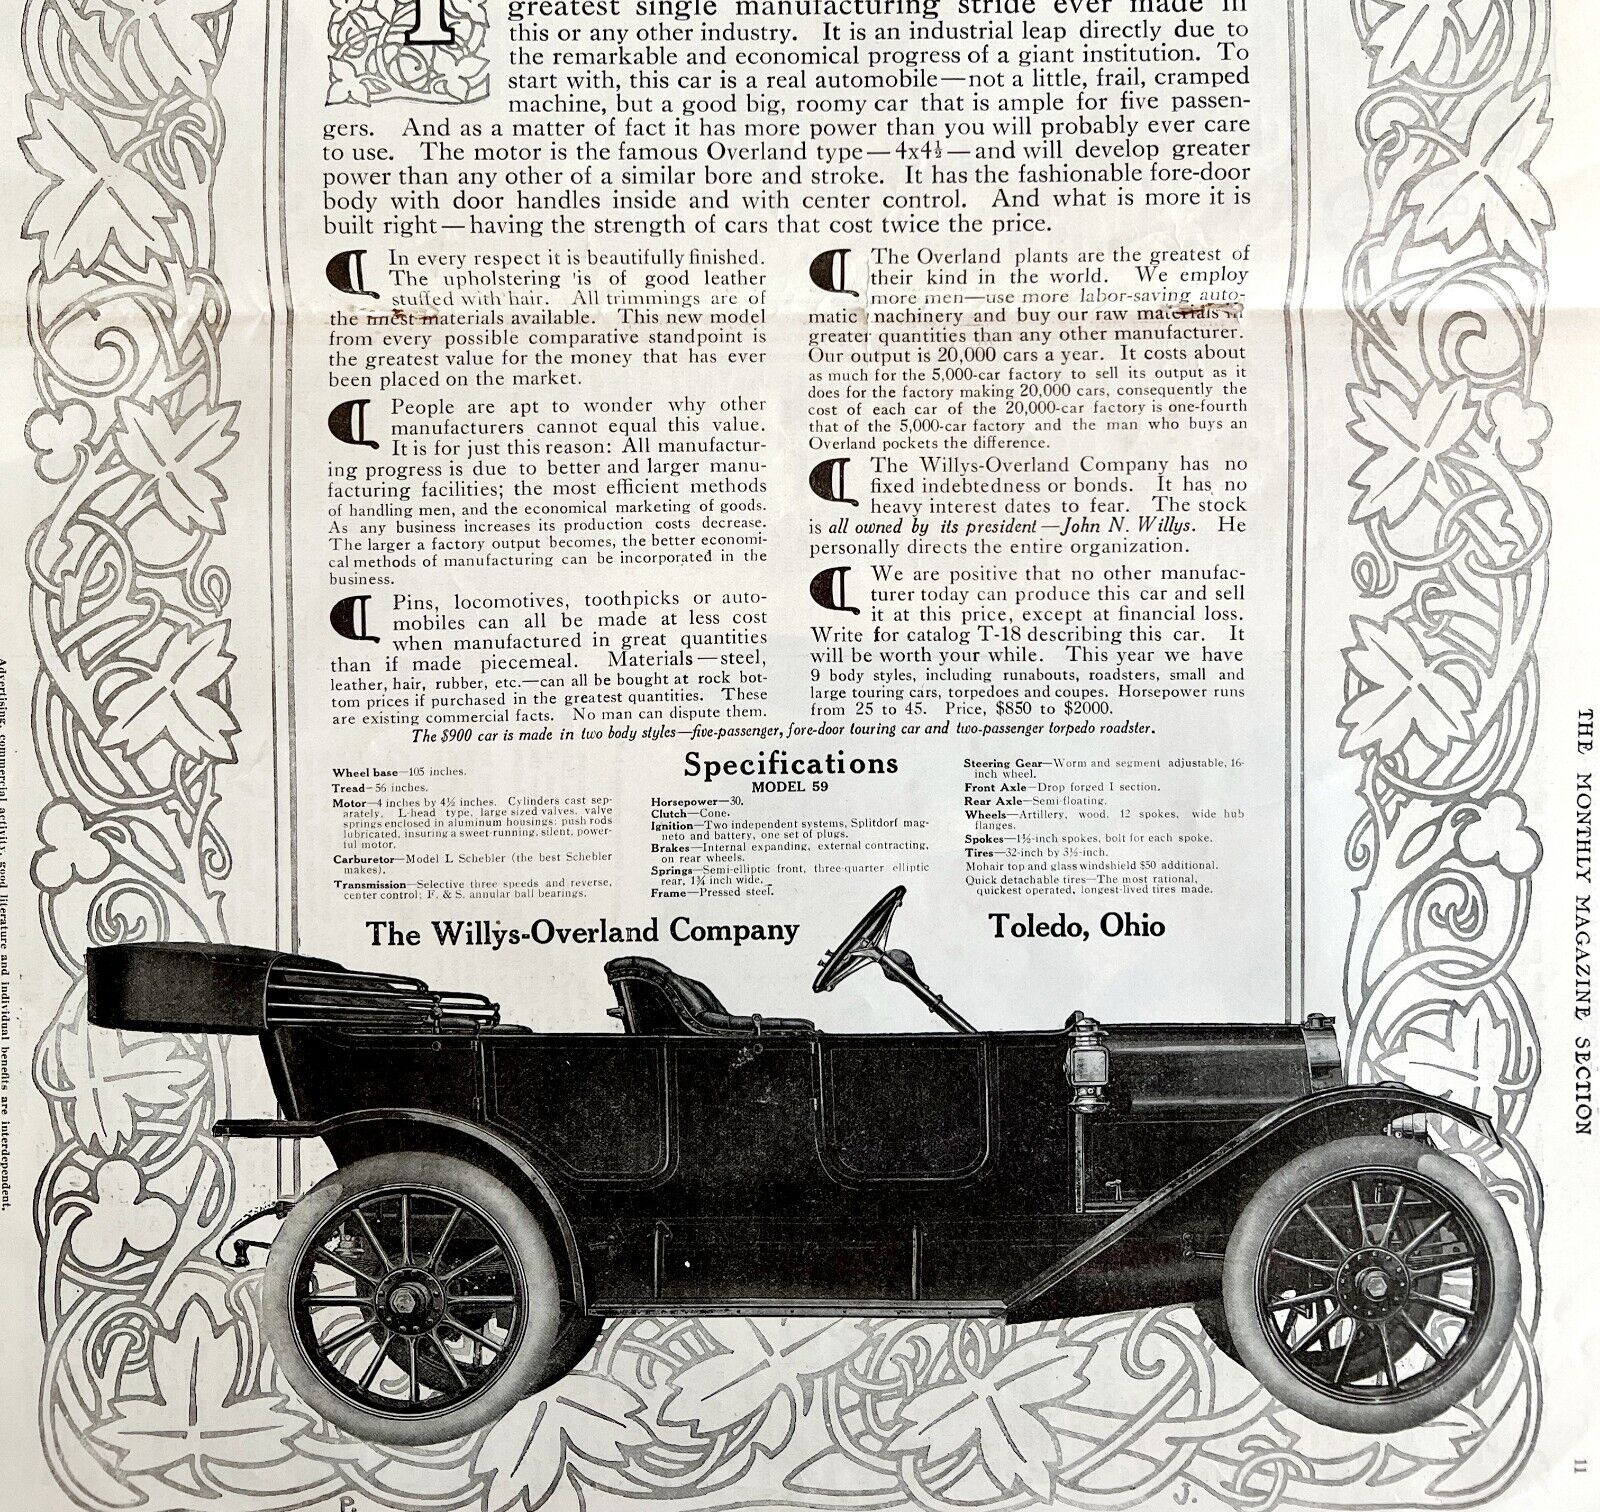 Willys Overland Model 59 1912 Advertisement Automobilia Touring Car DWDD17